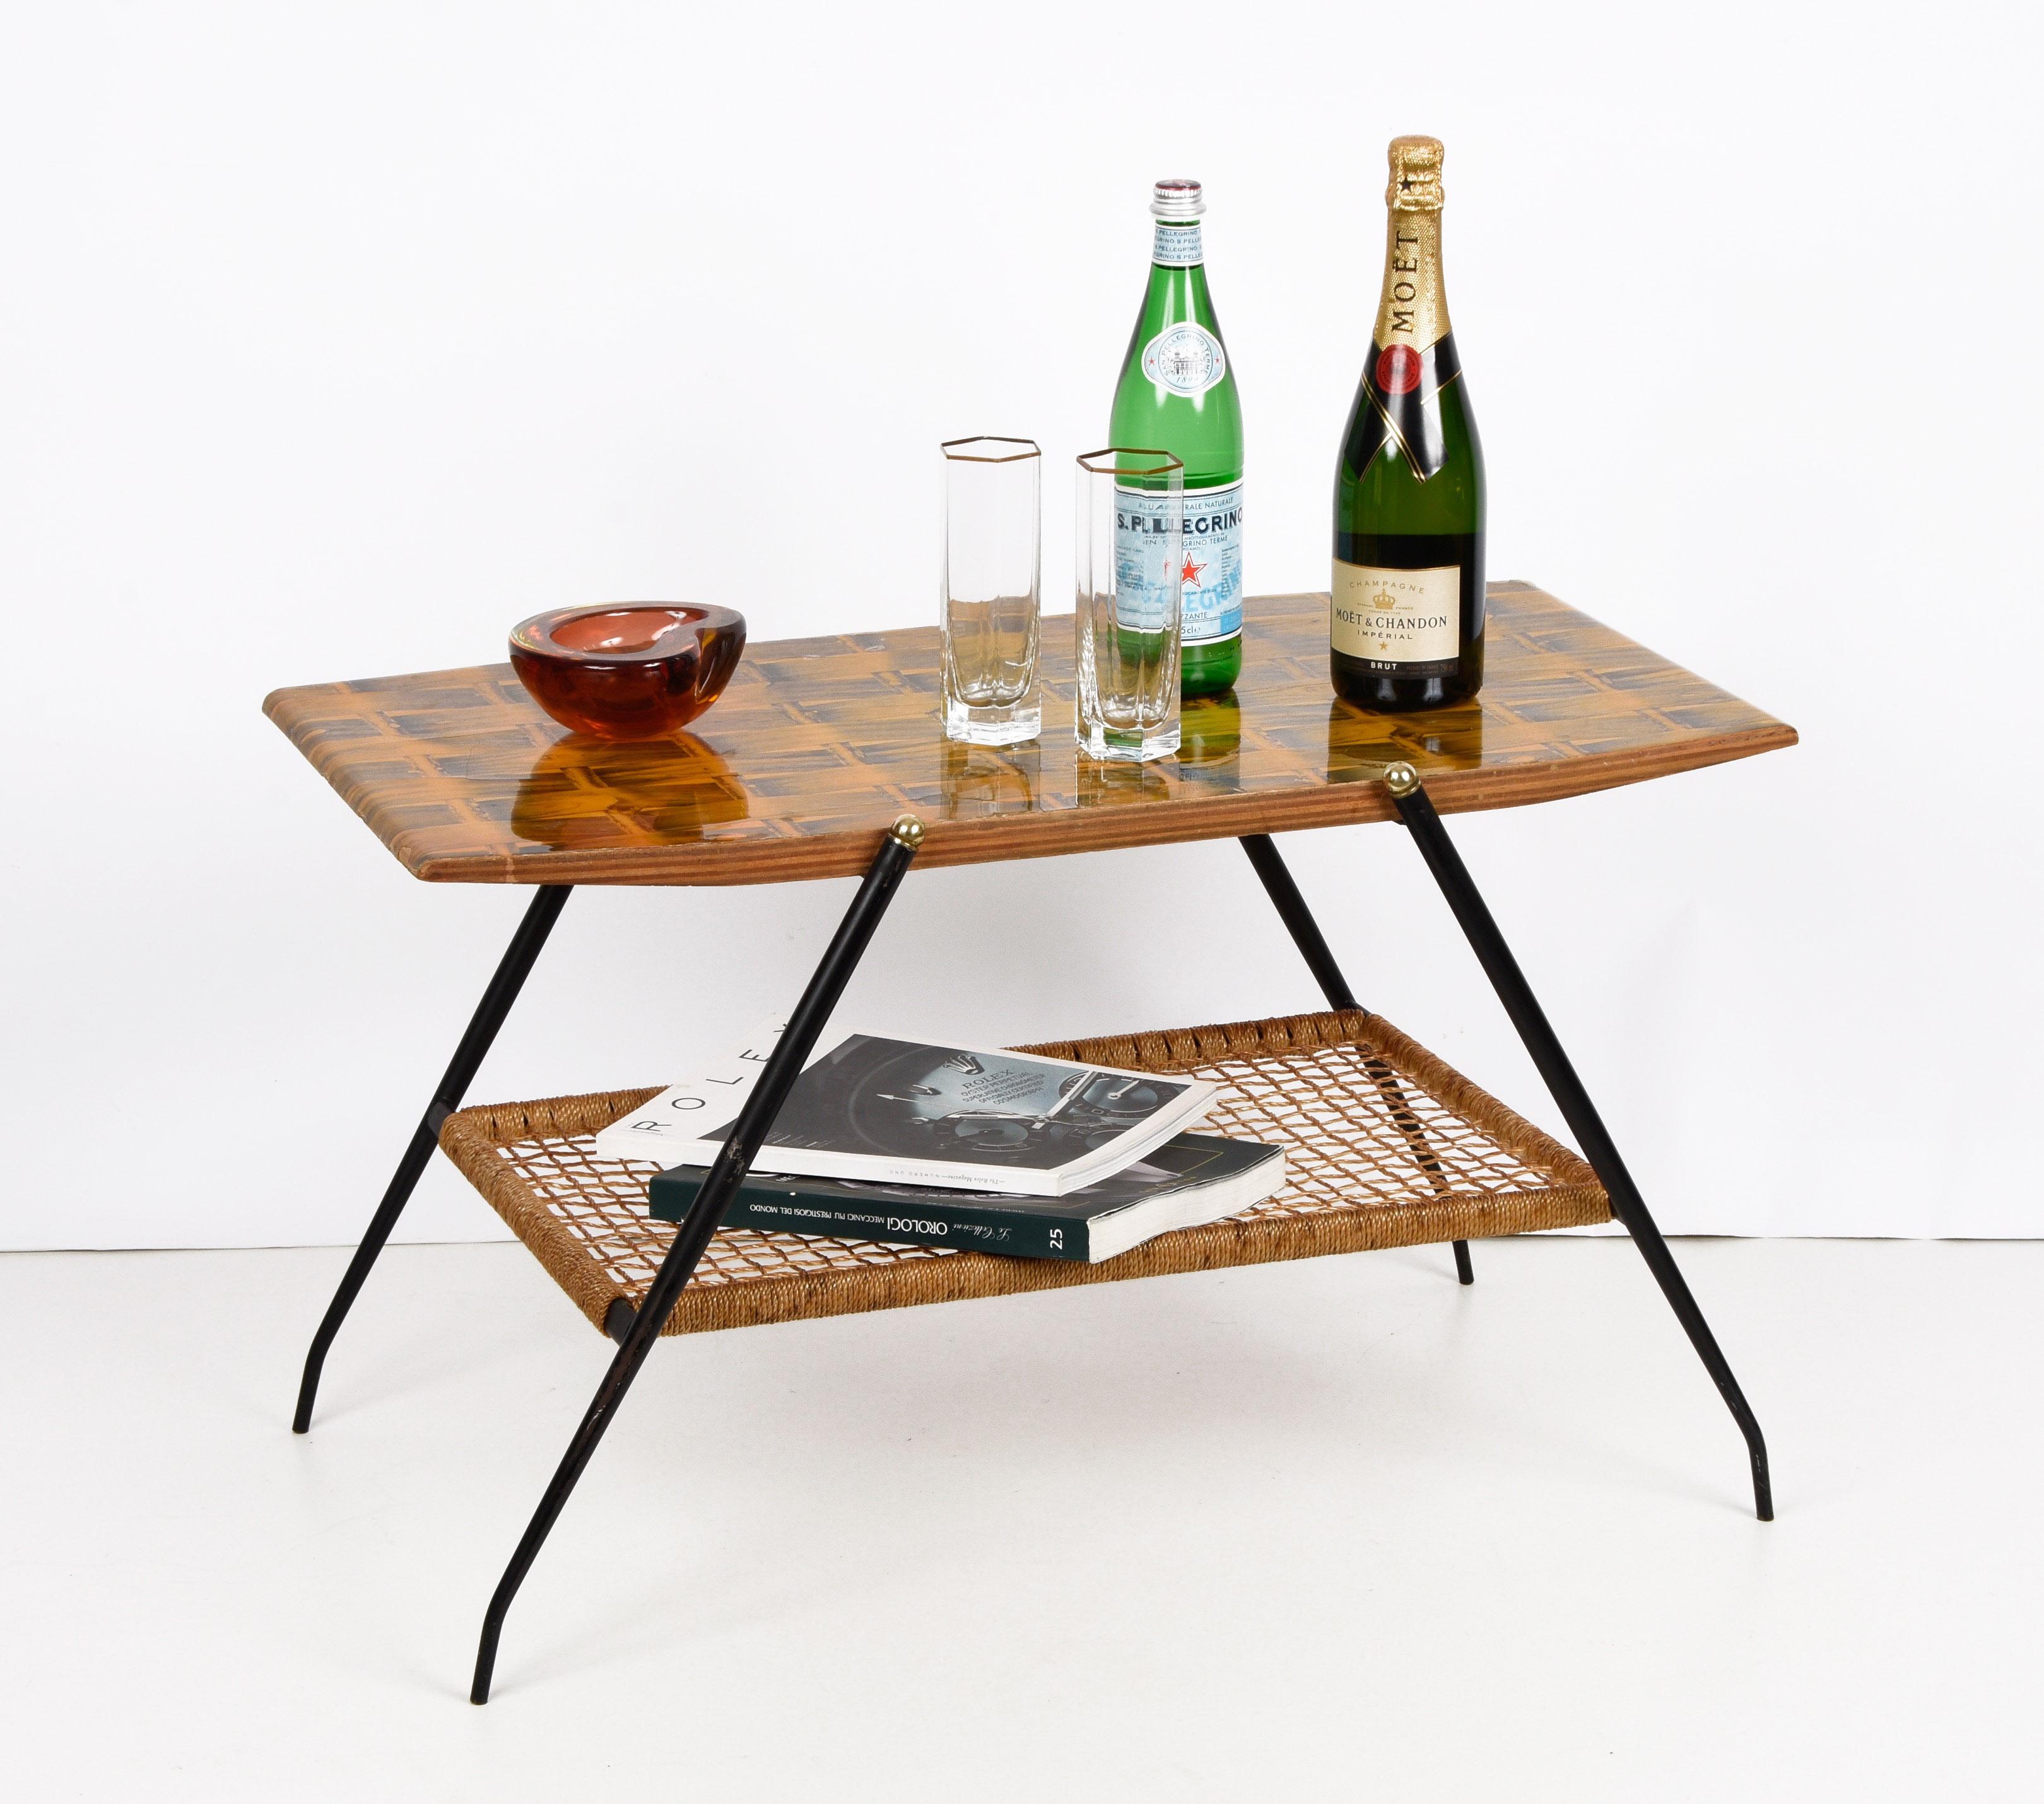 Midcentury Wood and Metal Italian Coffee Table with Brass Magazine Rack, 1950s For Sale 7